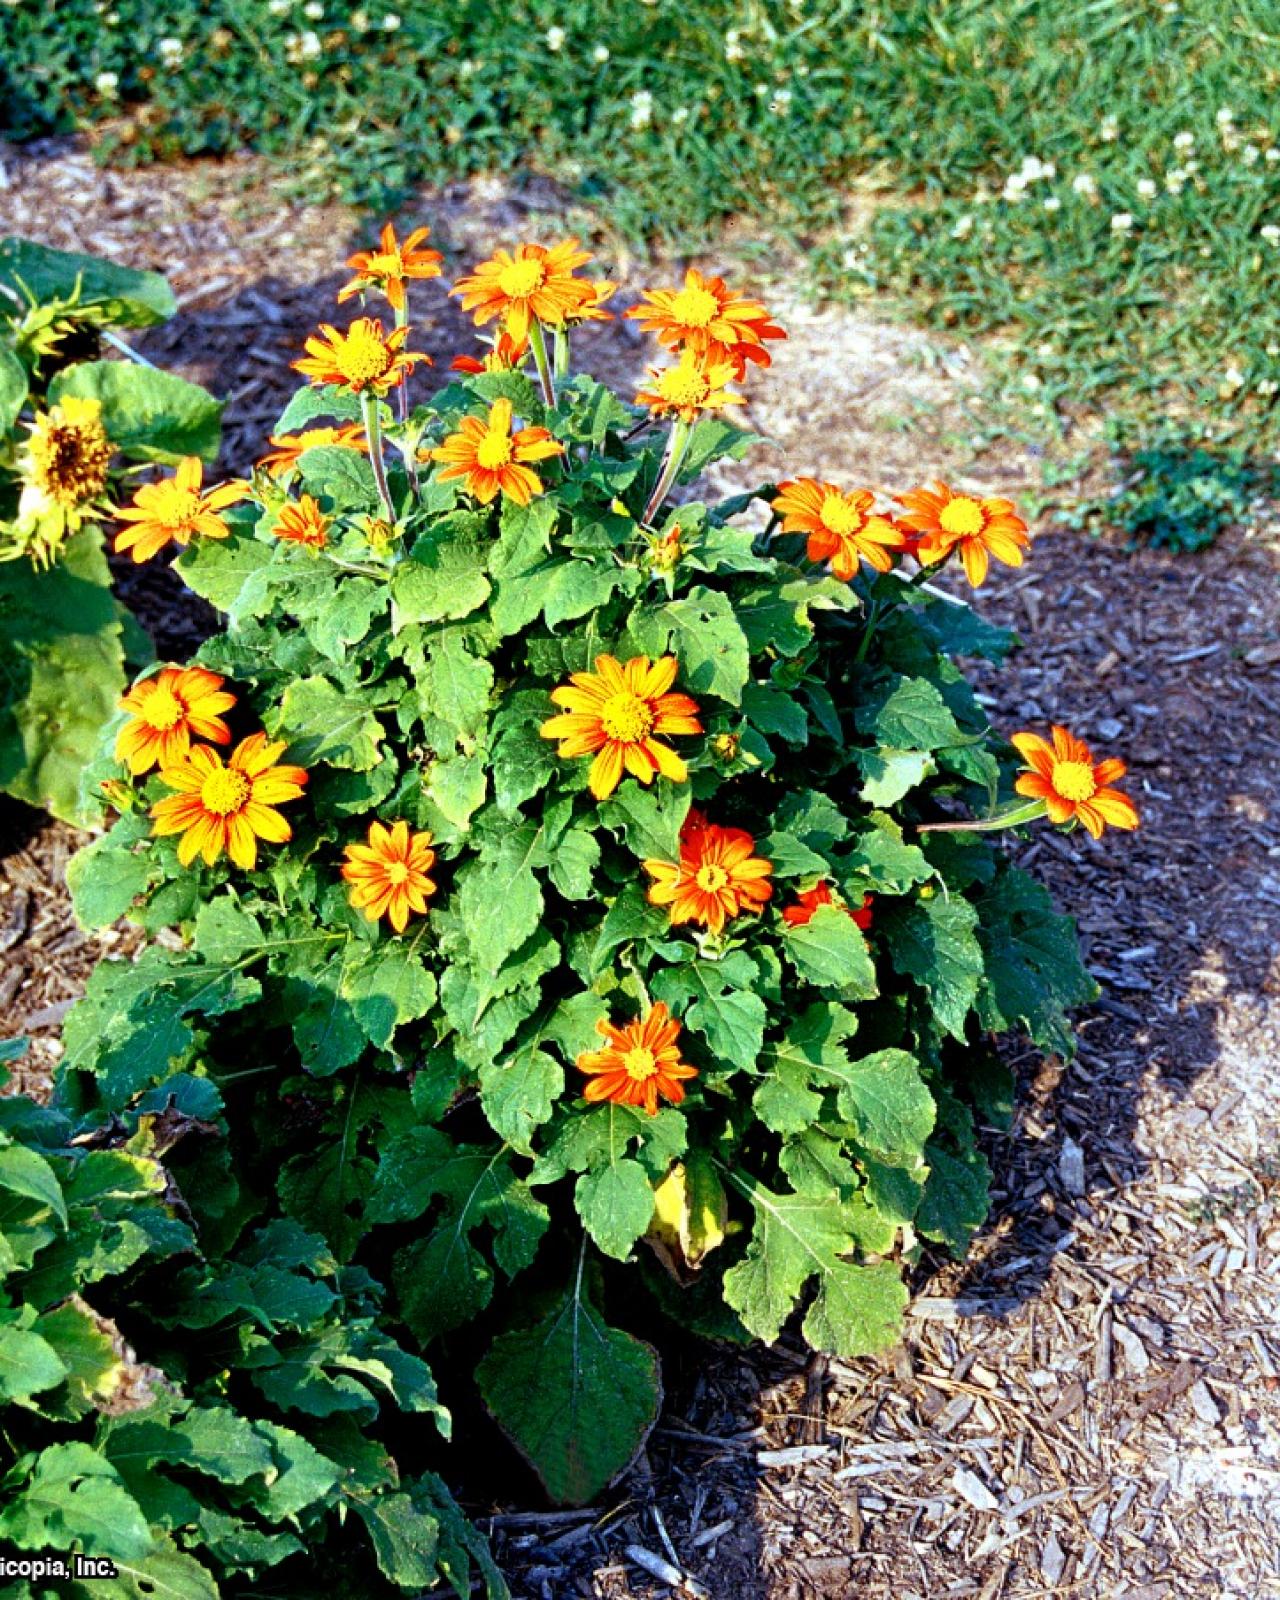 Mexican Sunflowers, Teddy Bear Sunflowers and Other Types   HGTV